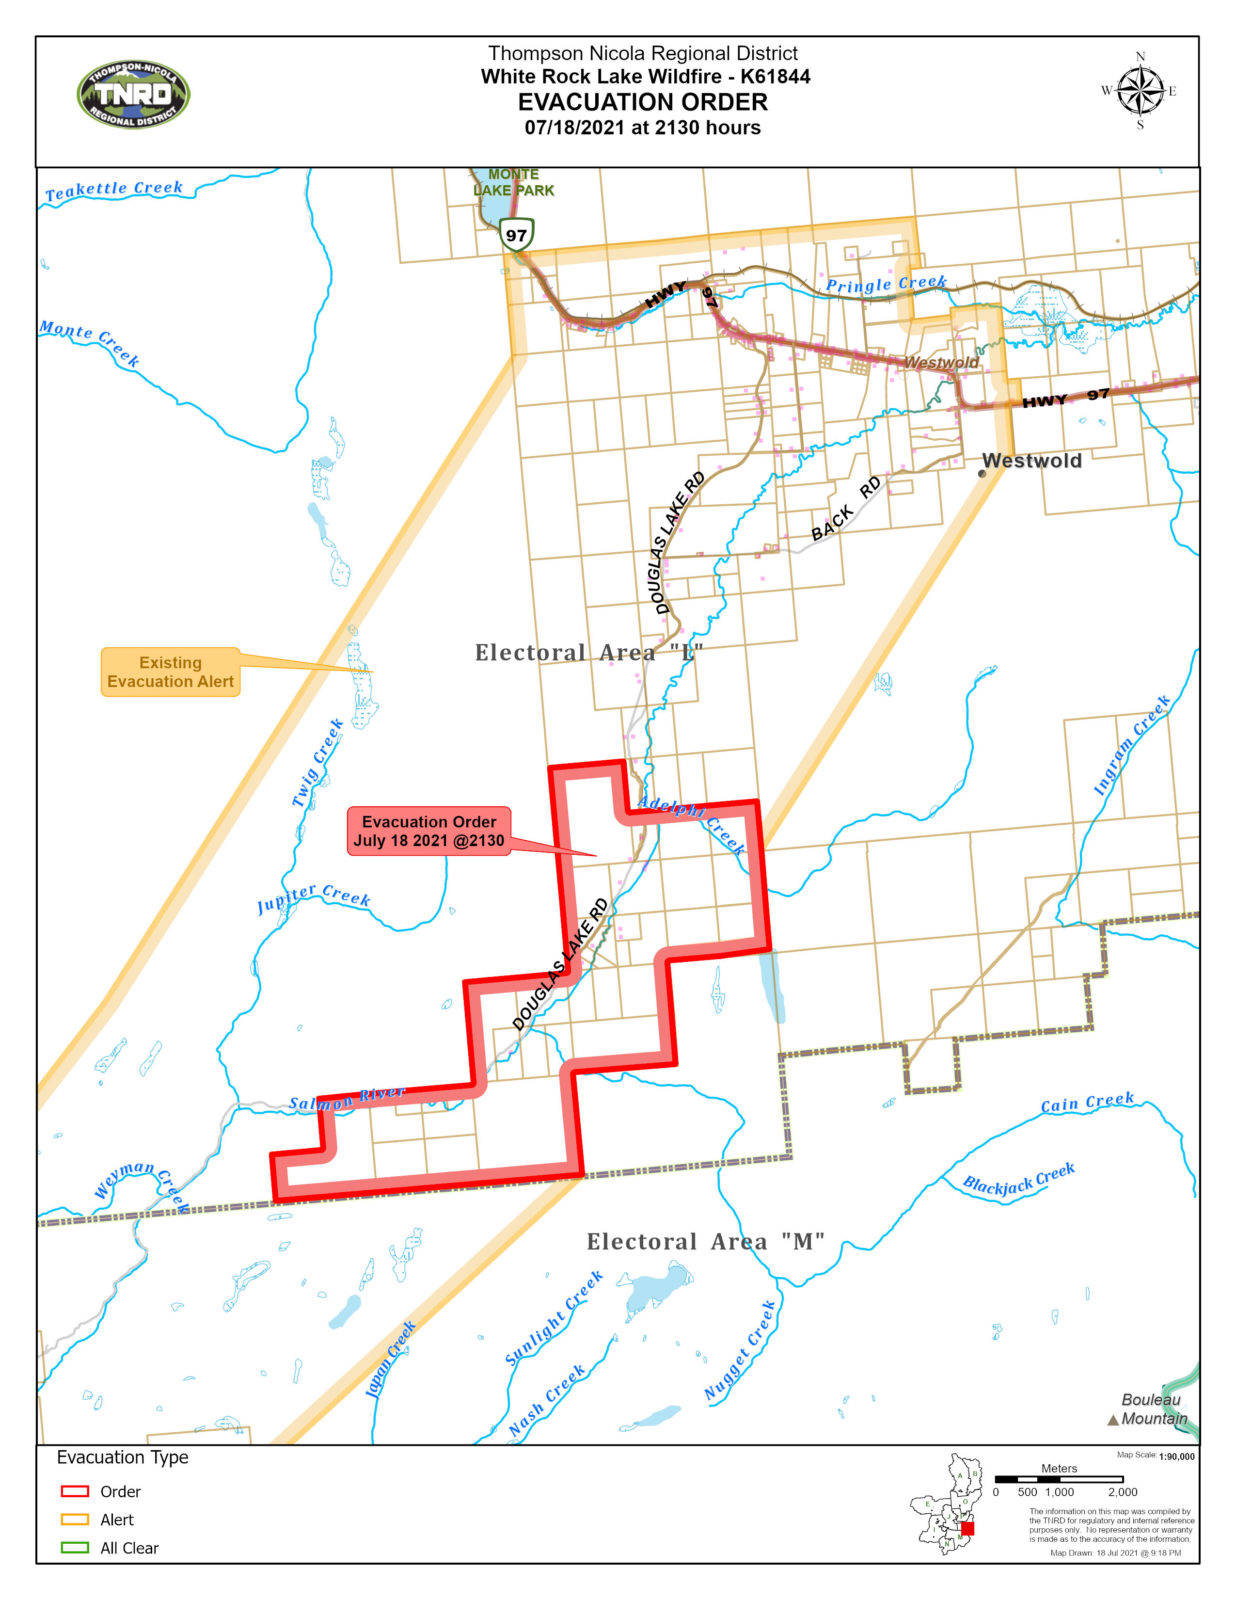 An evacuation order was issued for residents near Douglas Lake Road near Westwold Sunday, July 18, at 10:53 p.m. (TNDR)